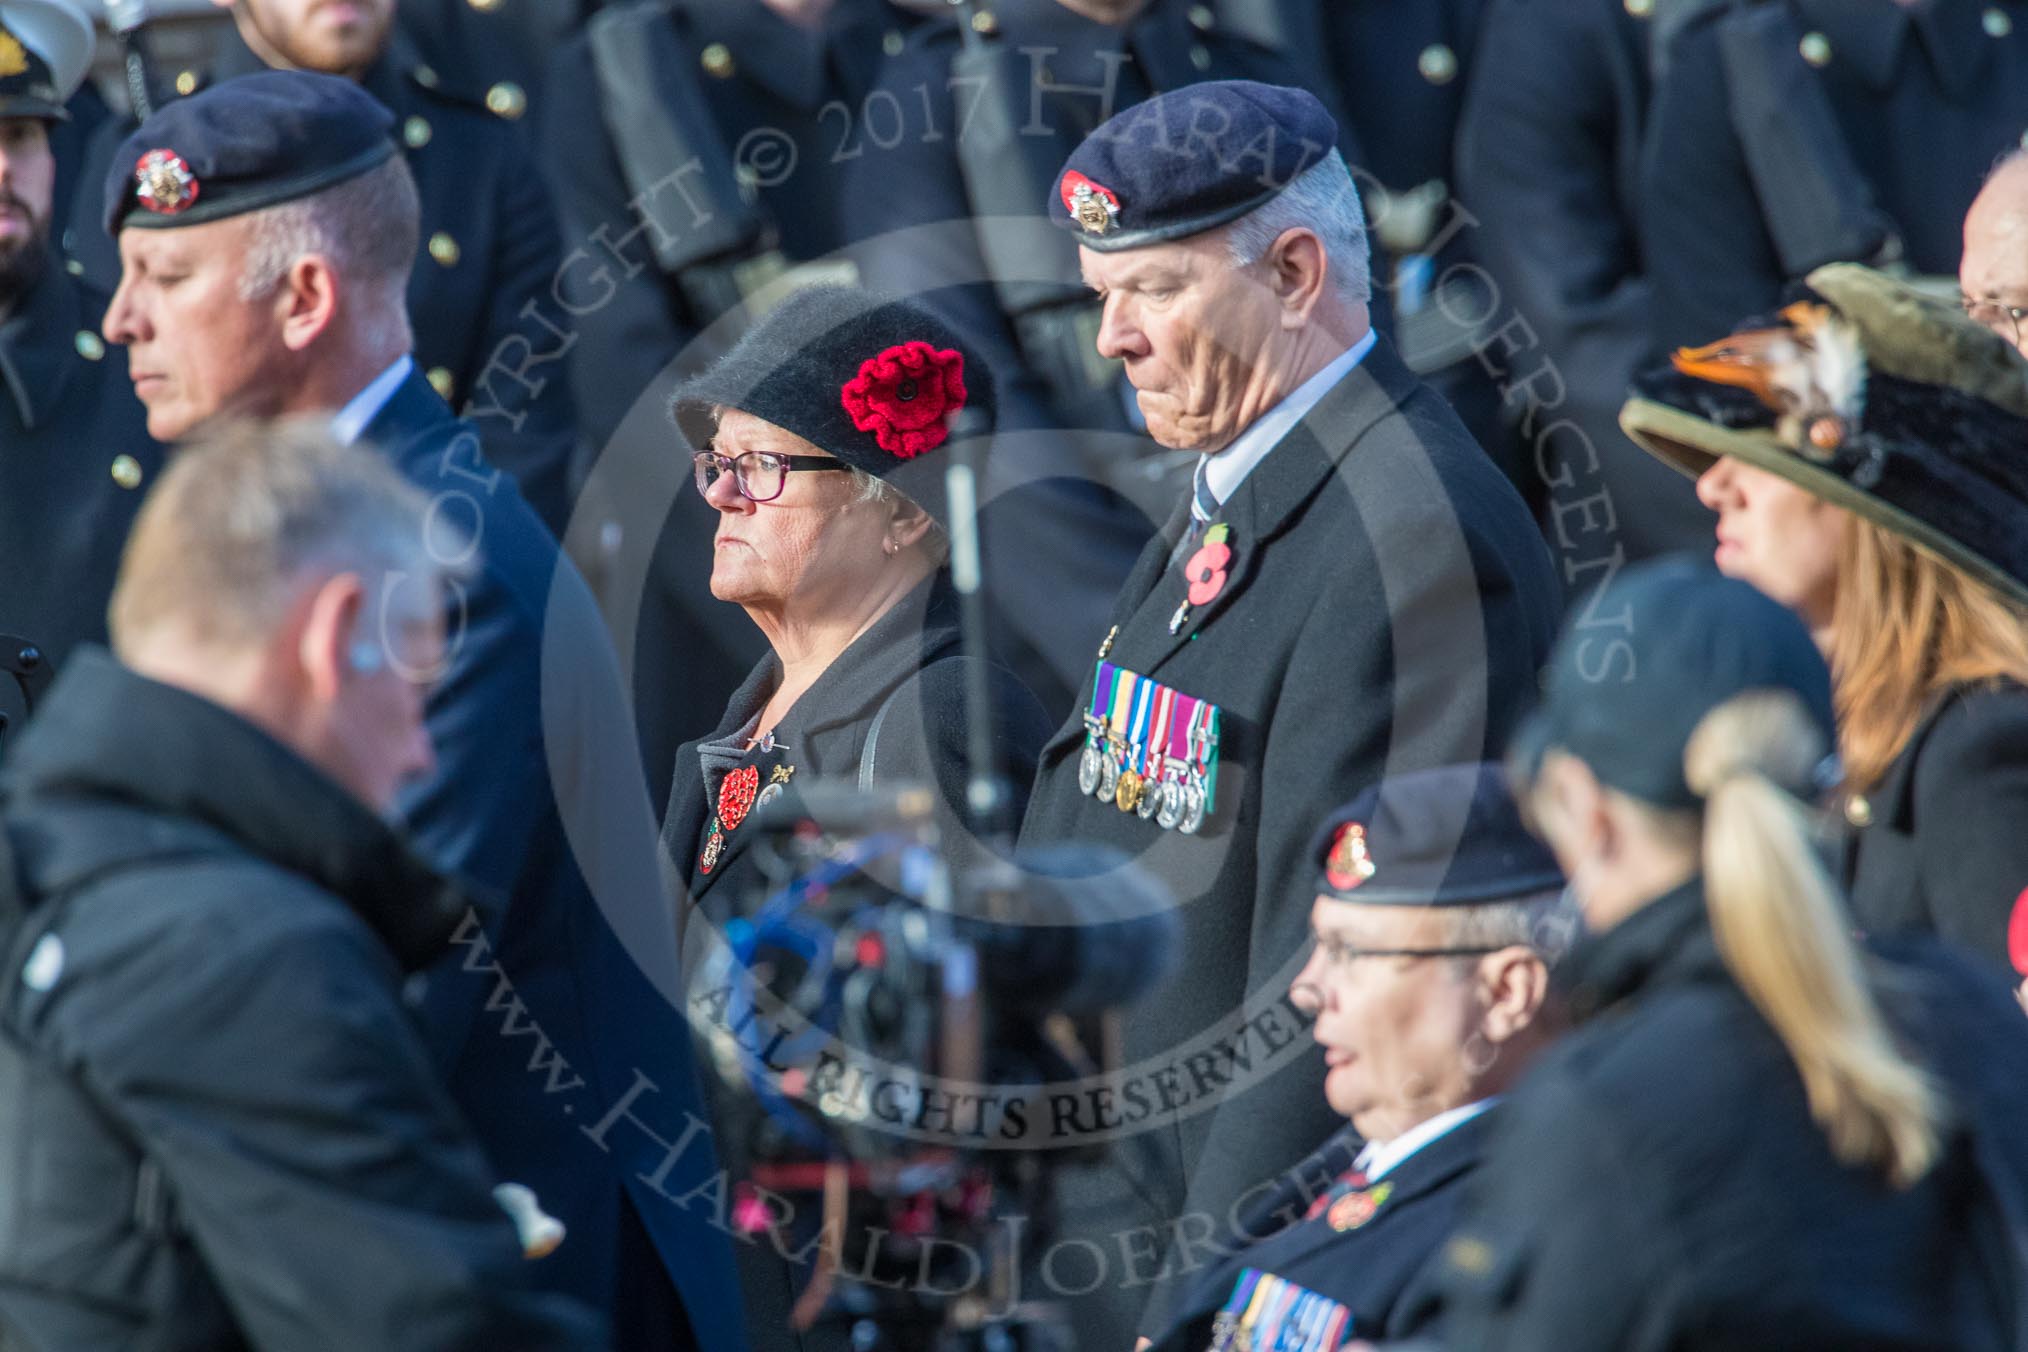 Suez Veterans' Association (Group F15, 32 members) during the Royal British Legion March Past on Remembrance Sunday at the Cenotaph, Whitehall, Westminster, London, 11 November 2018, 11:52.